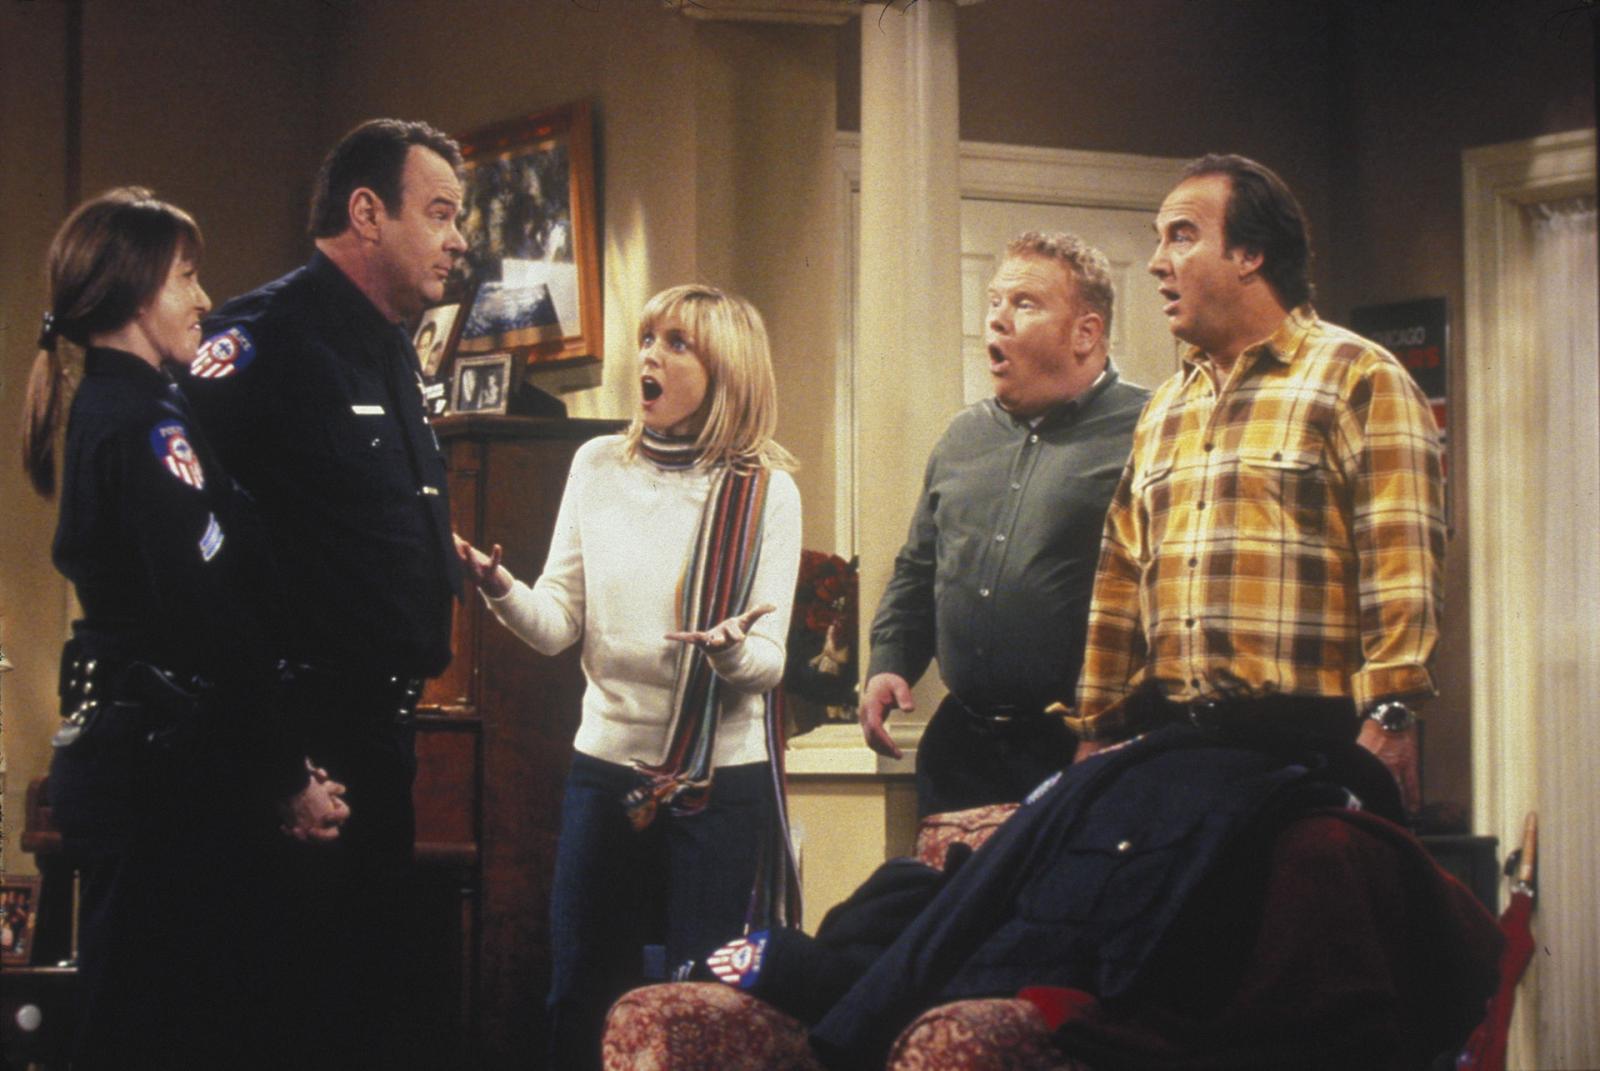 7 Least Funny Sitcoms According to Reddit: Don't Waste Your Time - image 5